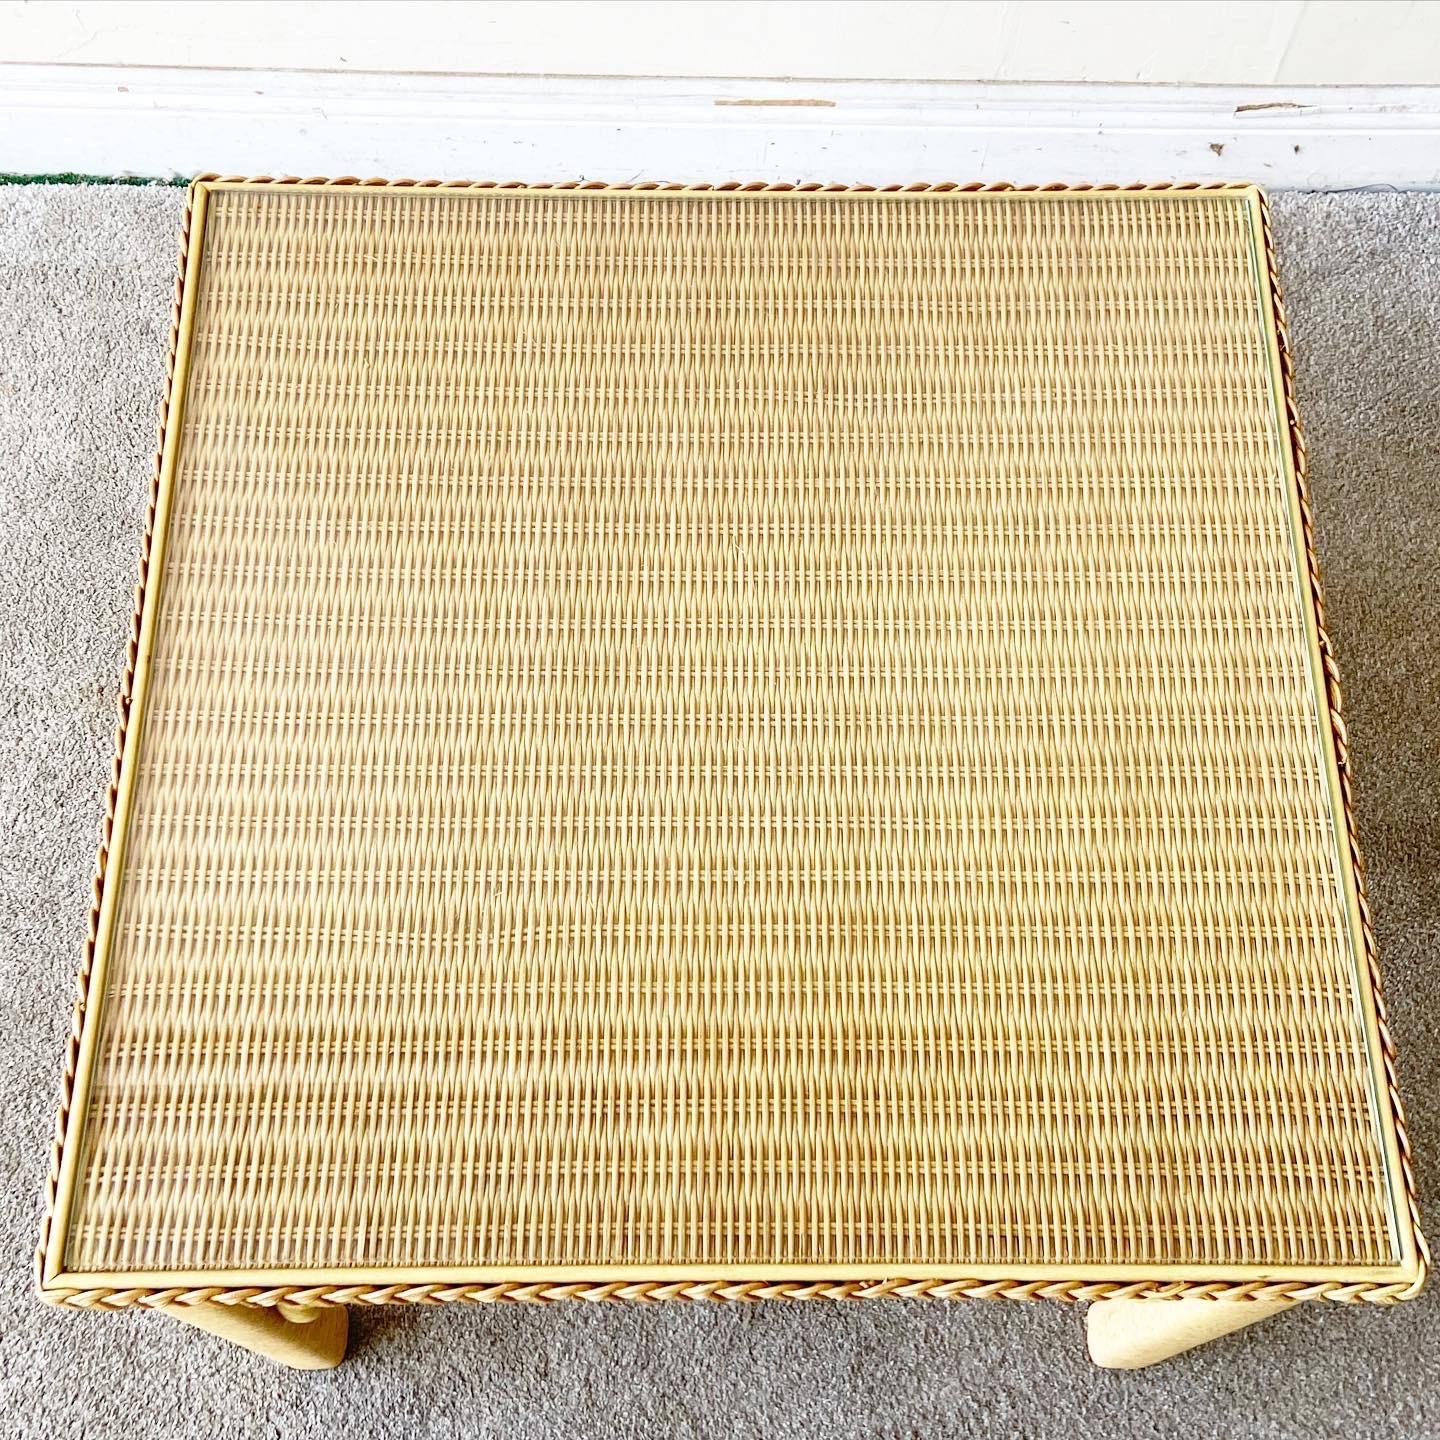 wicker end table with glass top